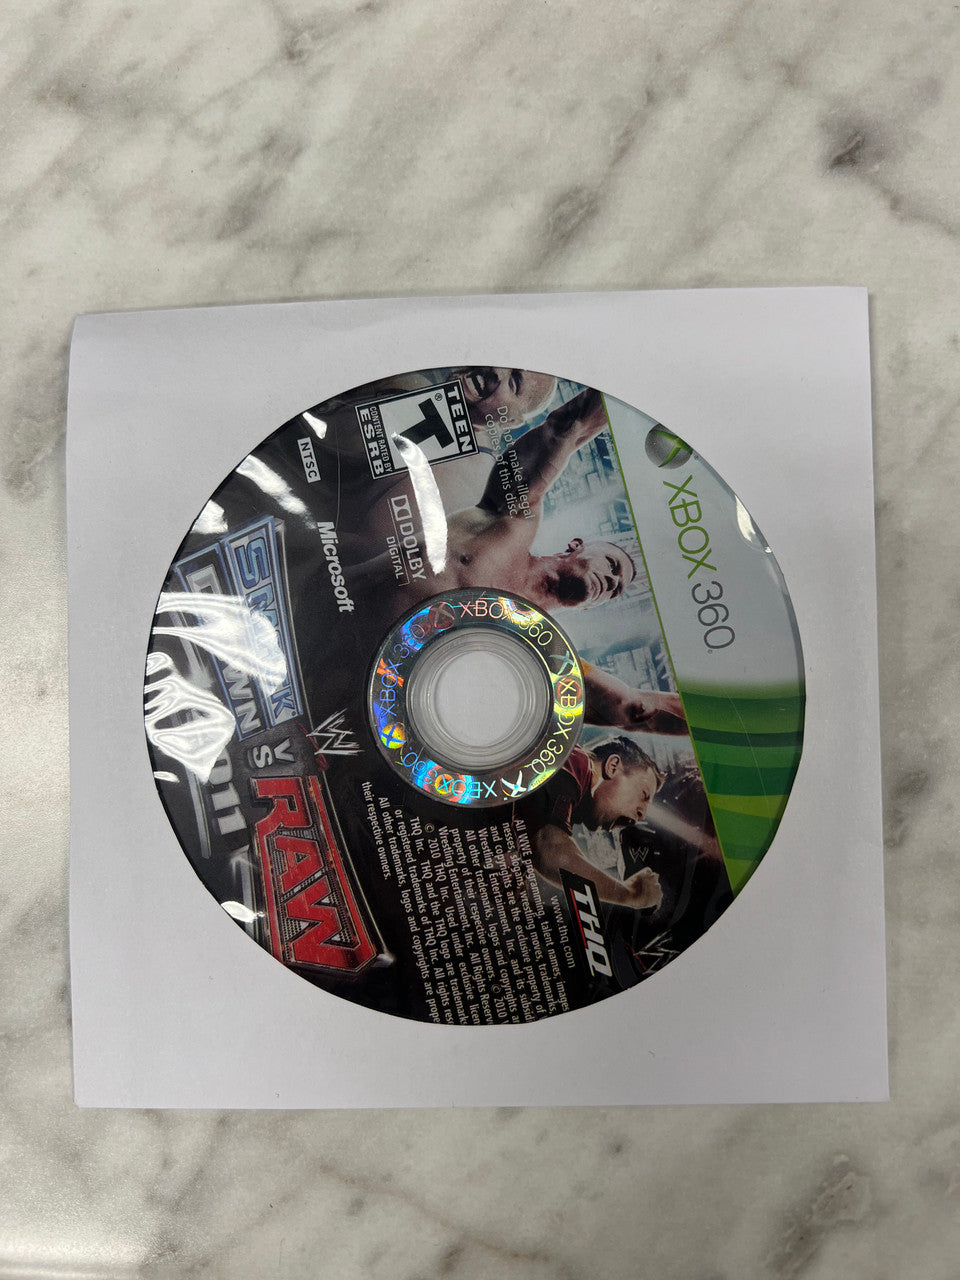 WWE Smackdown vs Raw 2011 Xbox 360 Disc only